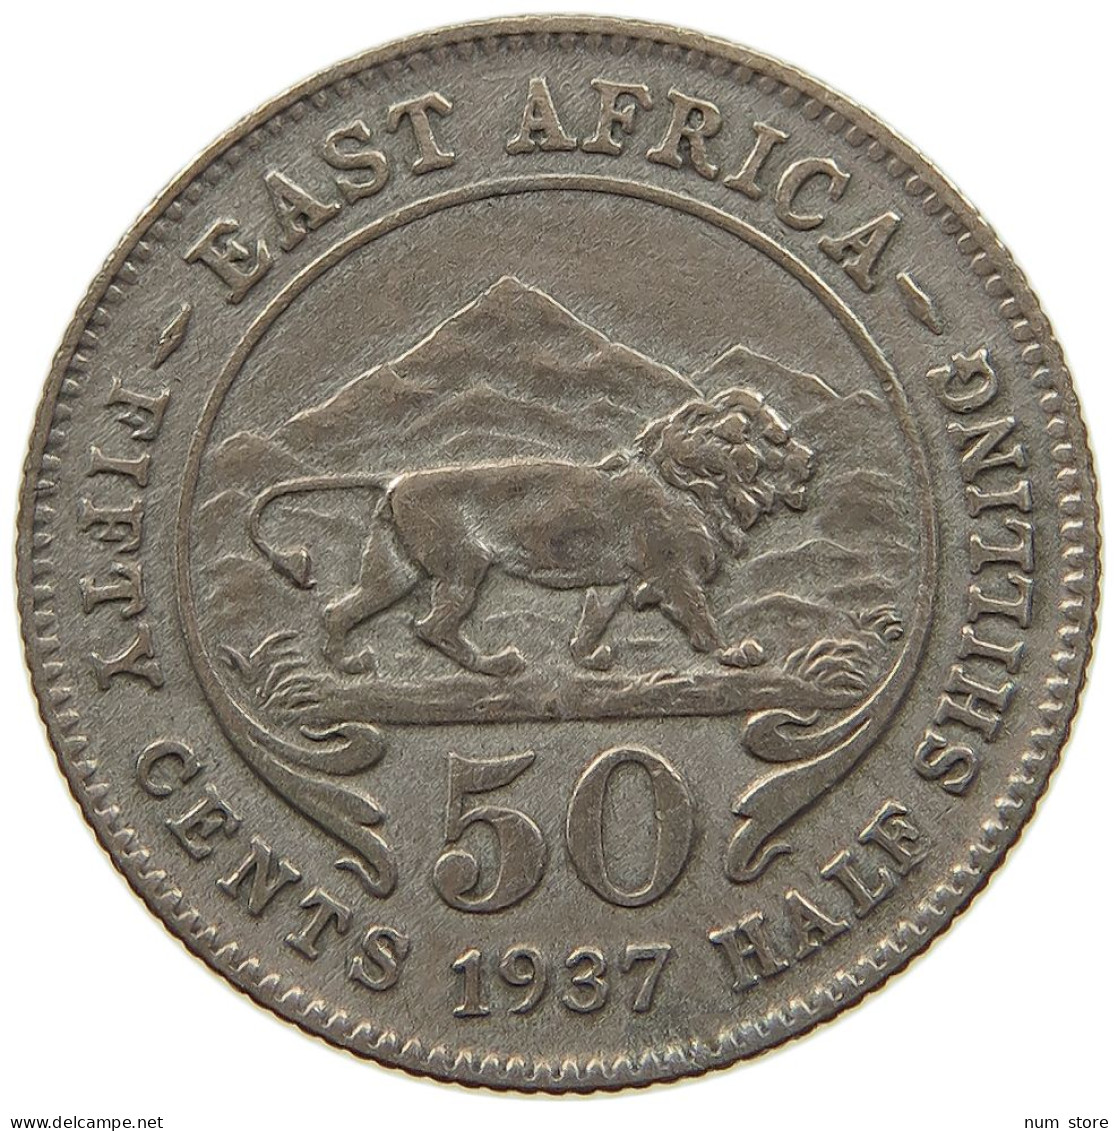 EAST AFRICA 50 CENTS 1937 GEORGE VI. (1936-1952) #MA 021362 - Colonia Británica